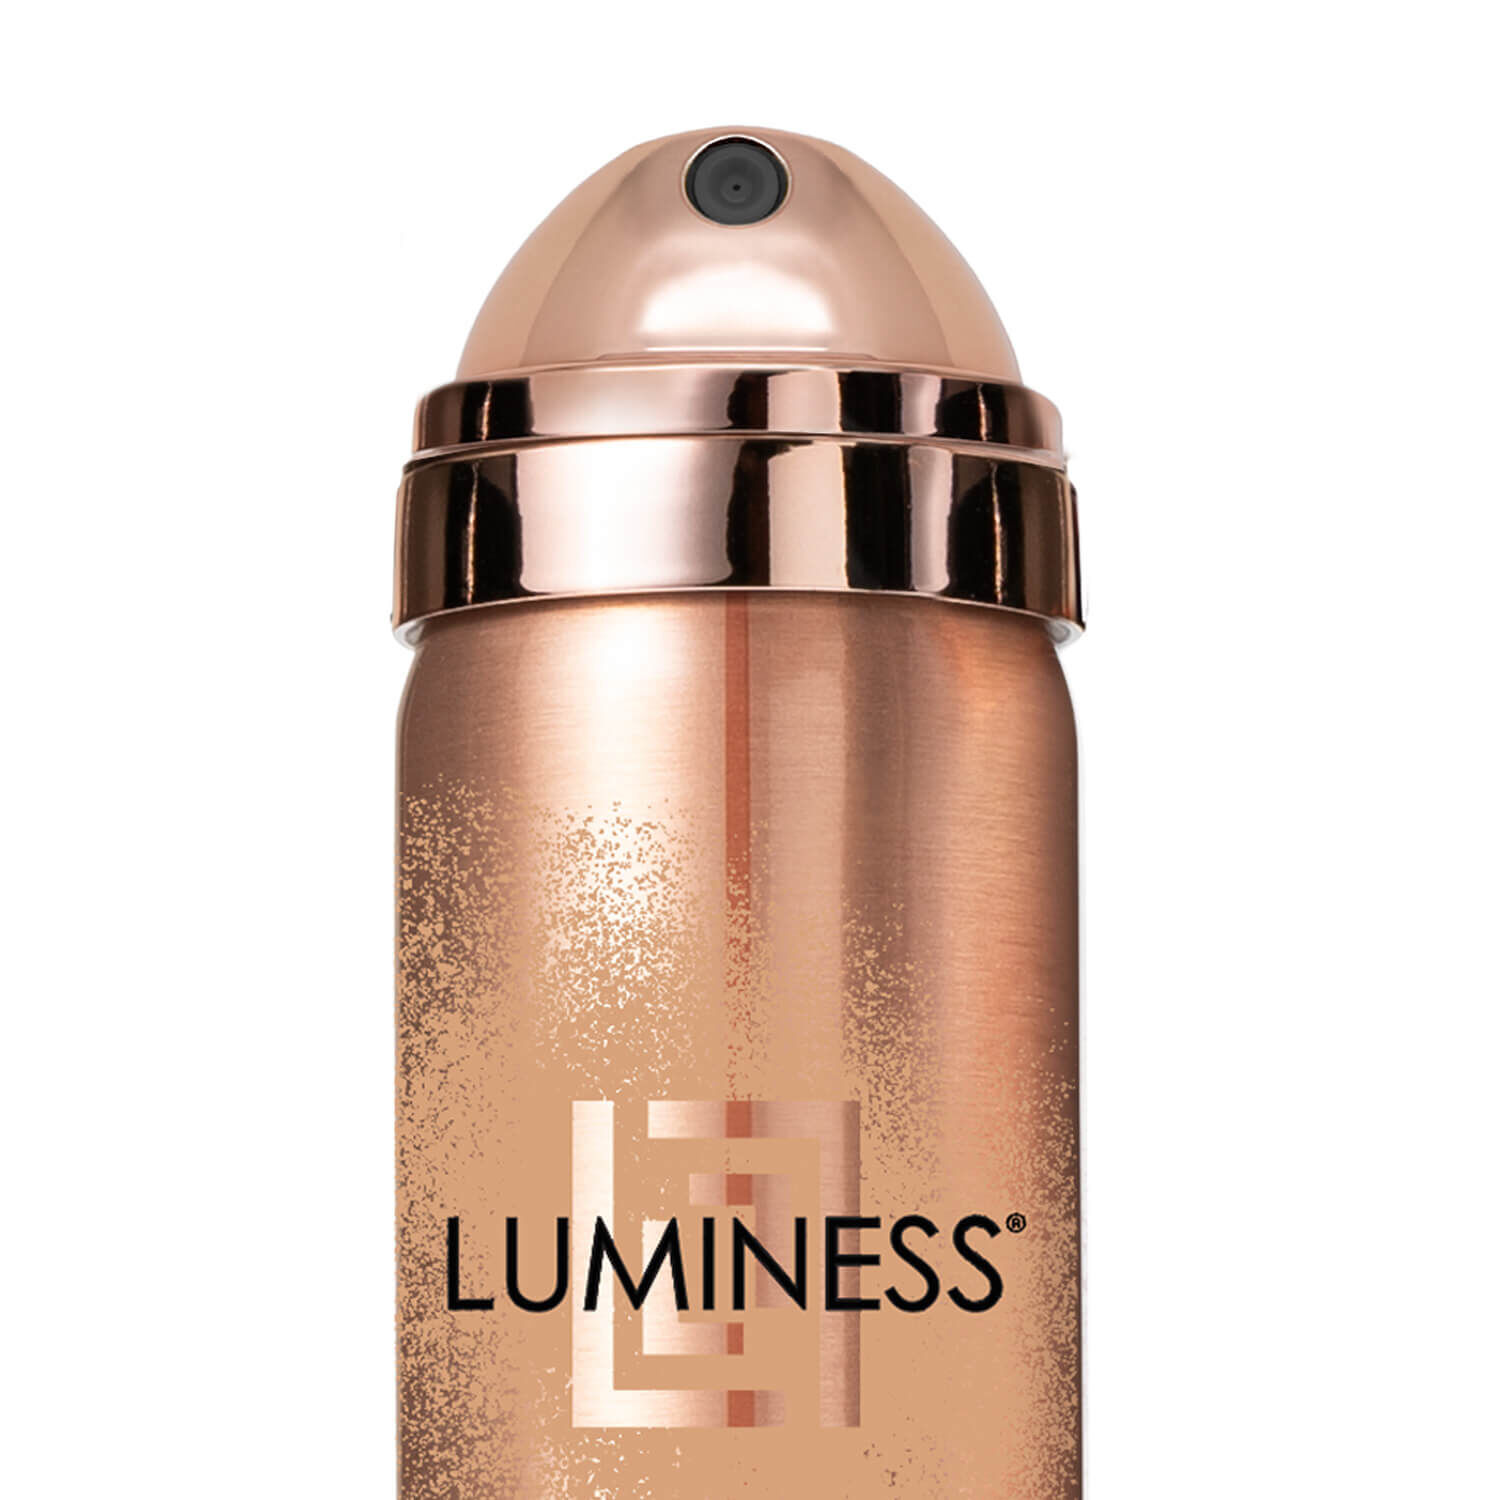  LUMINESS Silk Airbrush Spray Foundation Makeup Starter Kit -  Full Coverage Foundation, Primer & Dual-Sided Buffing Brush - Buildable  Coverage, Anti-Aging Formula Hydrates & Moisturizes (Shade - Warm) : Beauty  